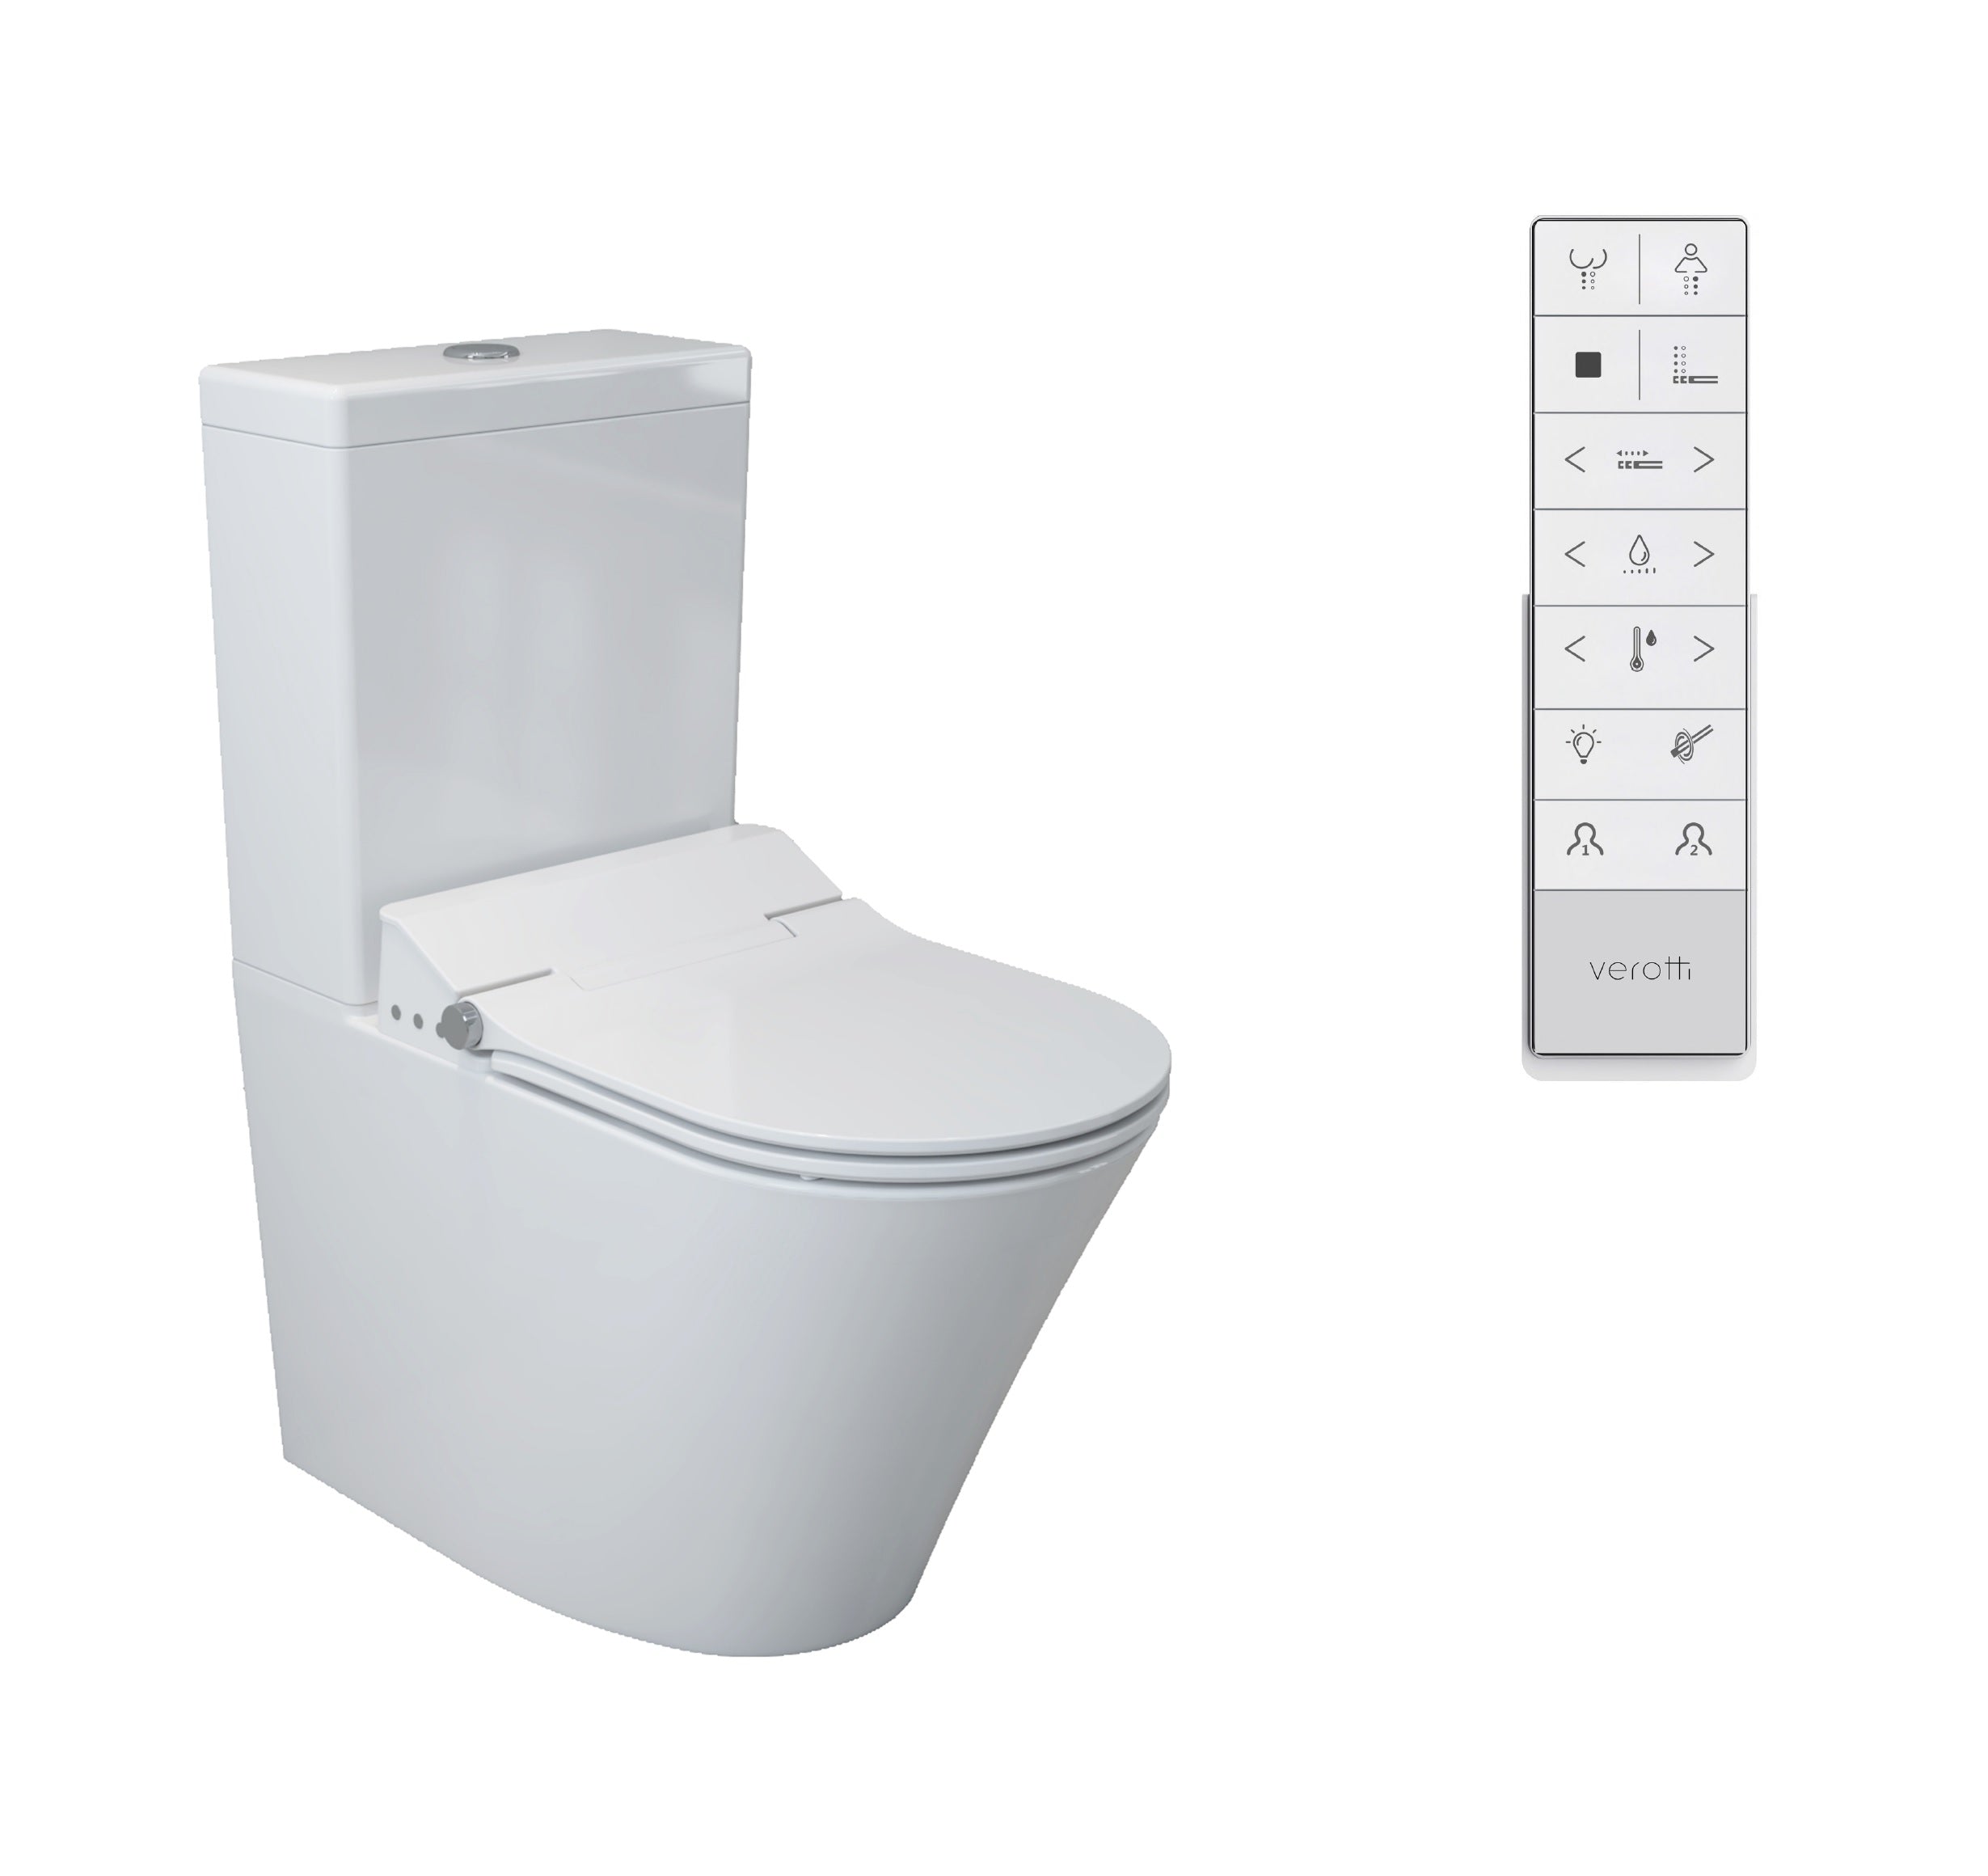 VEROTTI ETERNITY INTELLIGENT BTW TOILET SUITE WITH REMOTE WASHLET PACKAGE GLOSS WHITE